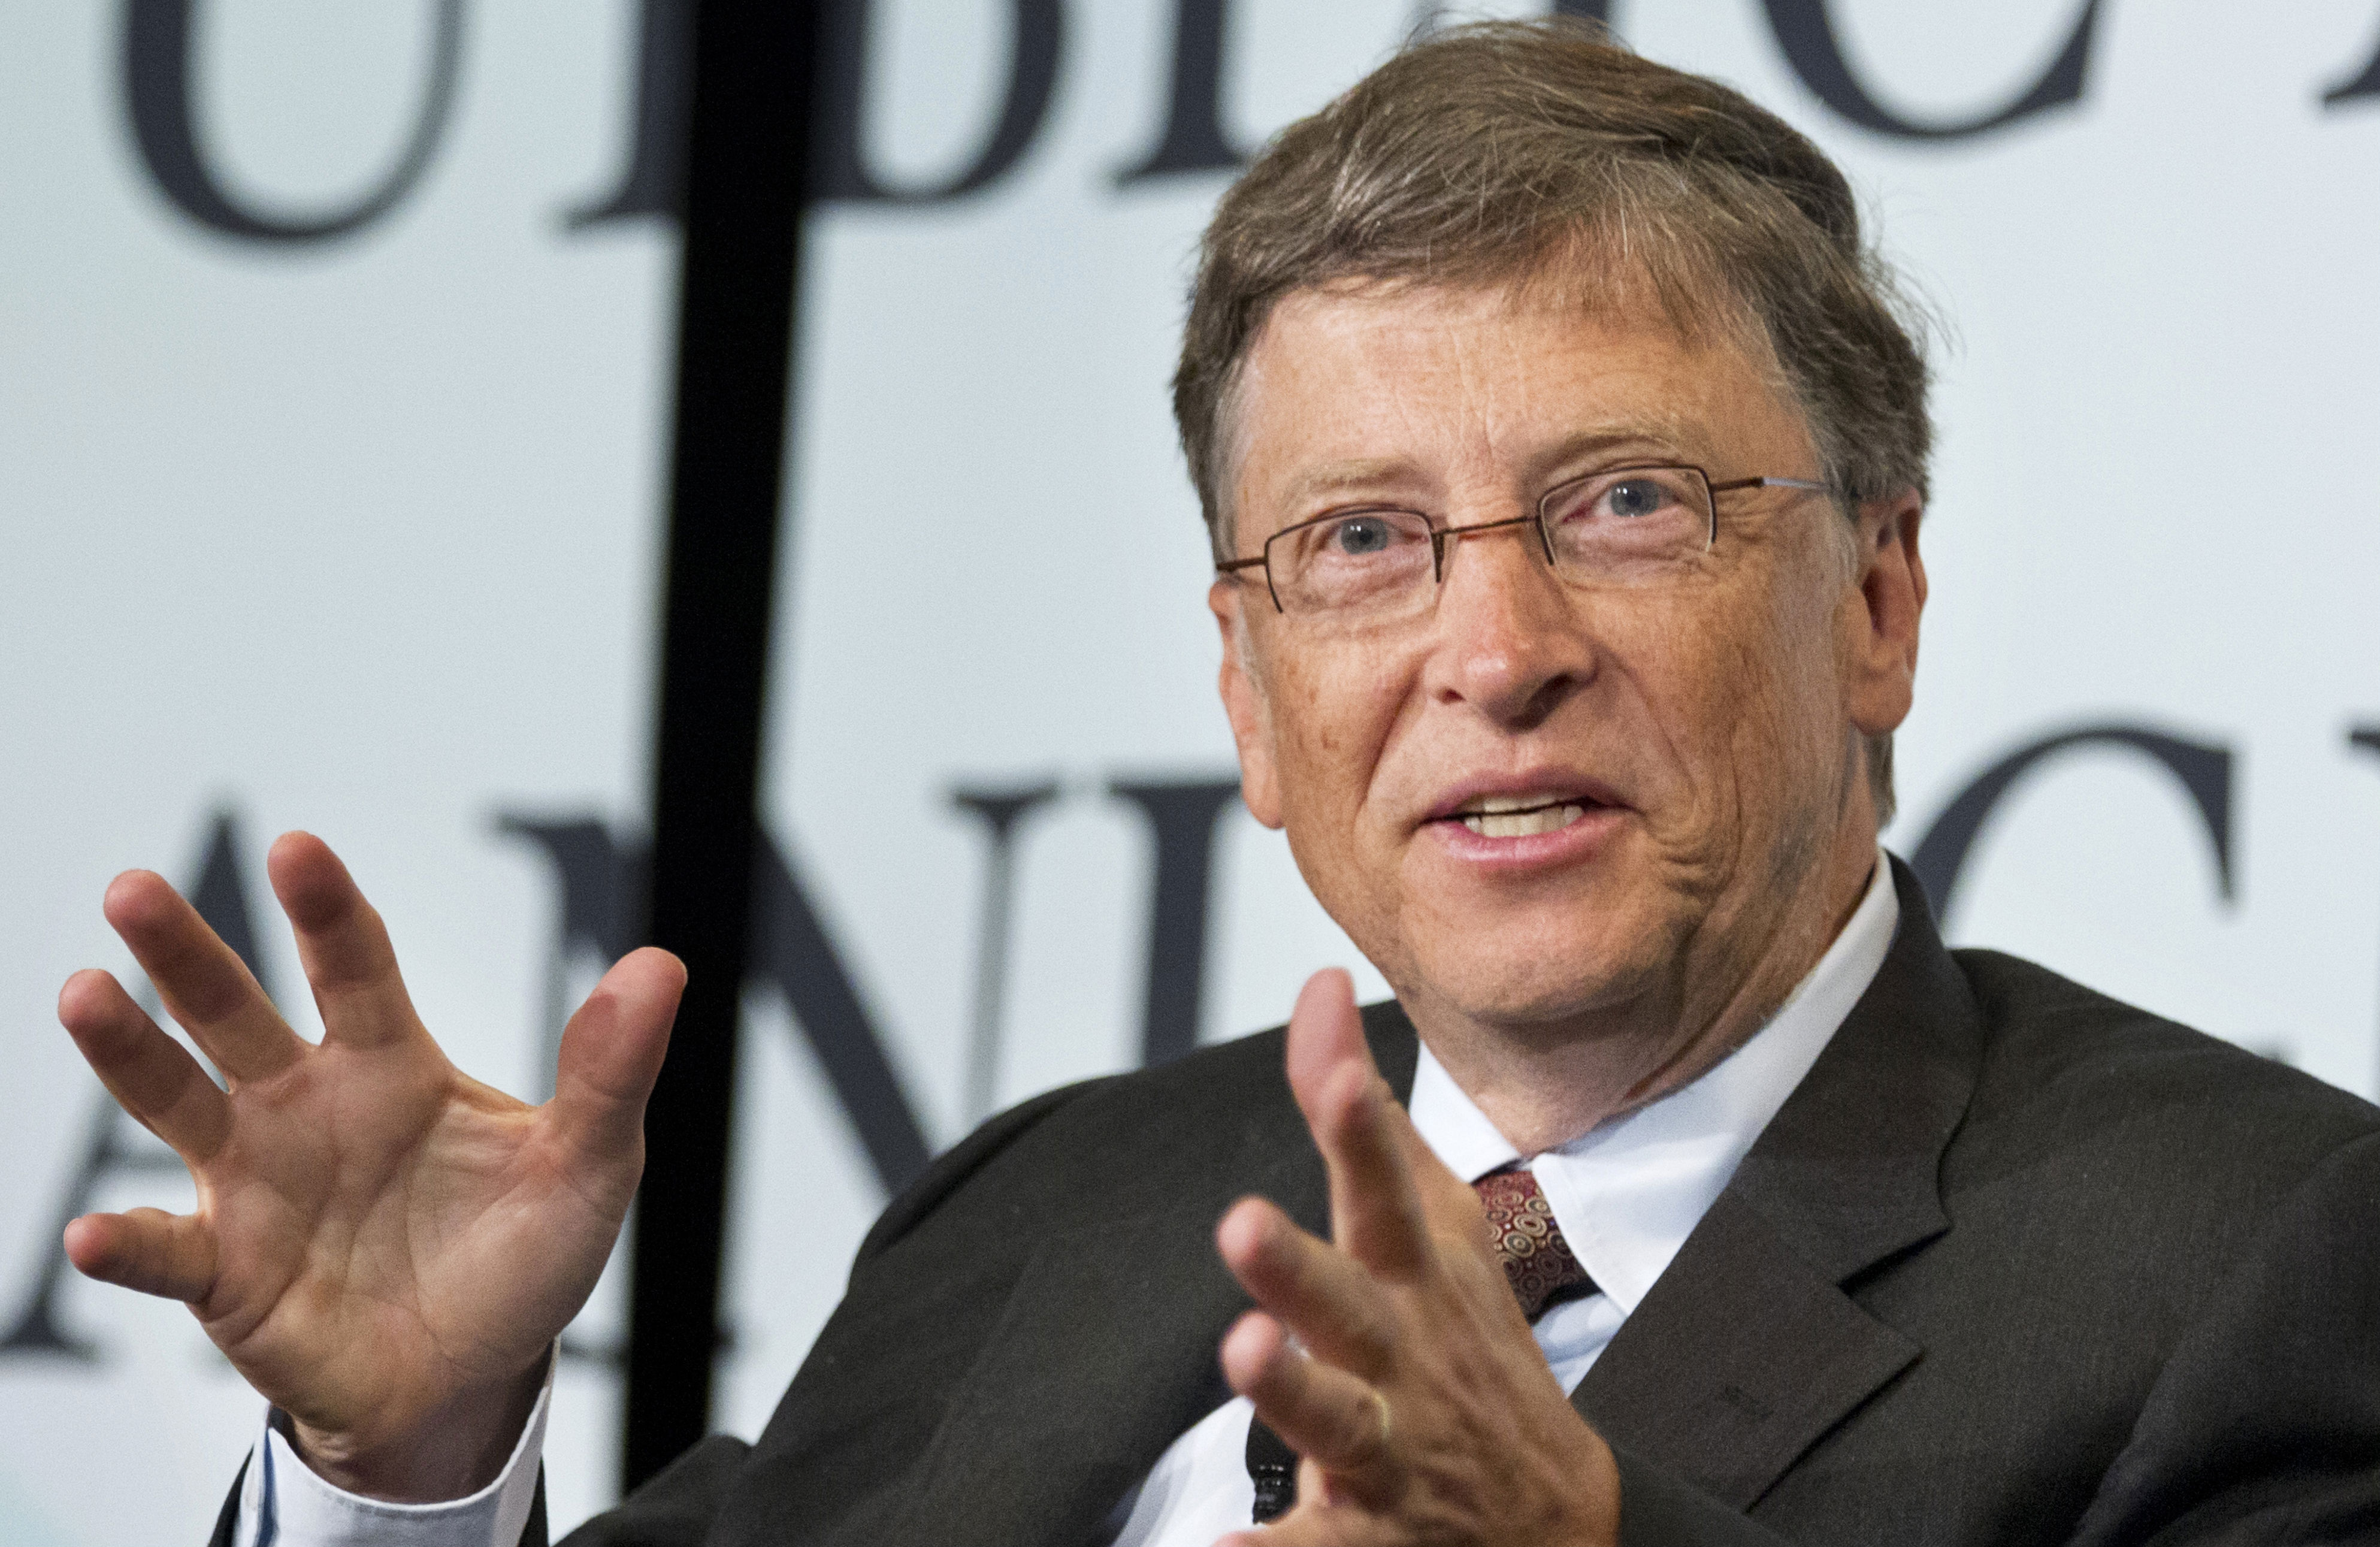 What Is Bill Gates’s Email Address?